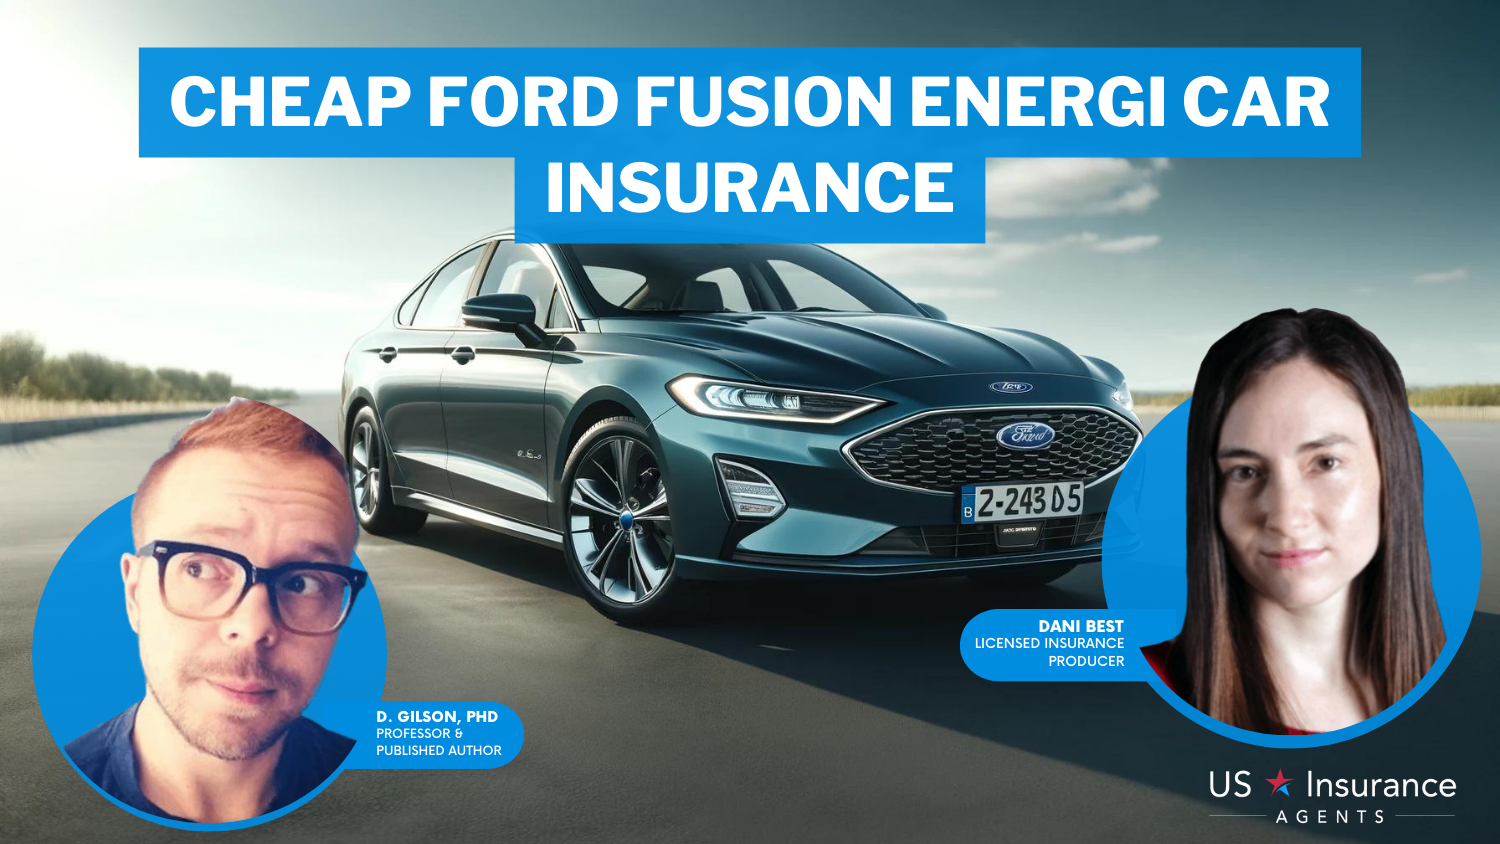 Cheap Ford Fusion Energi Car Insurance: Auto-Owners, Erie, AAA